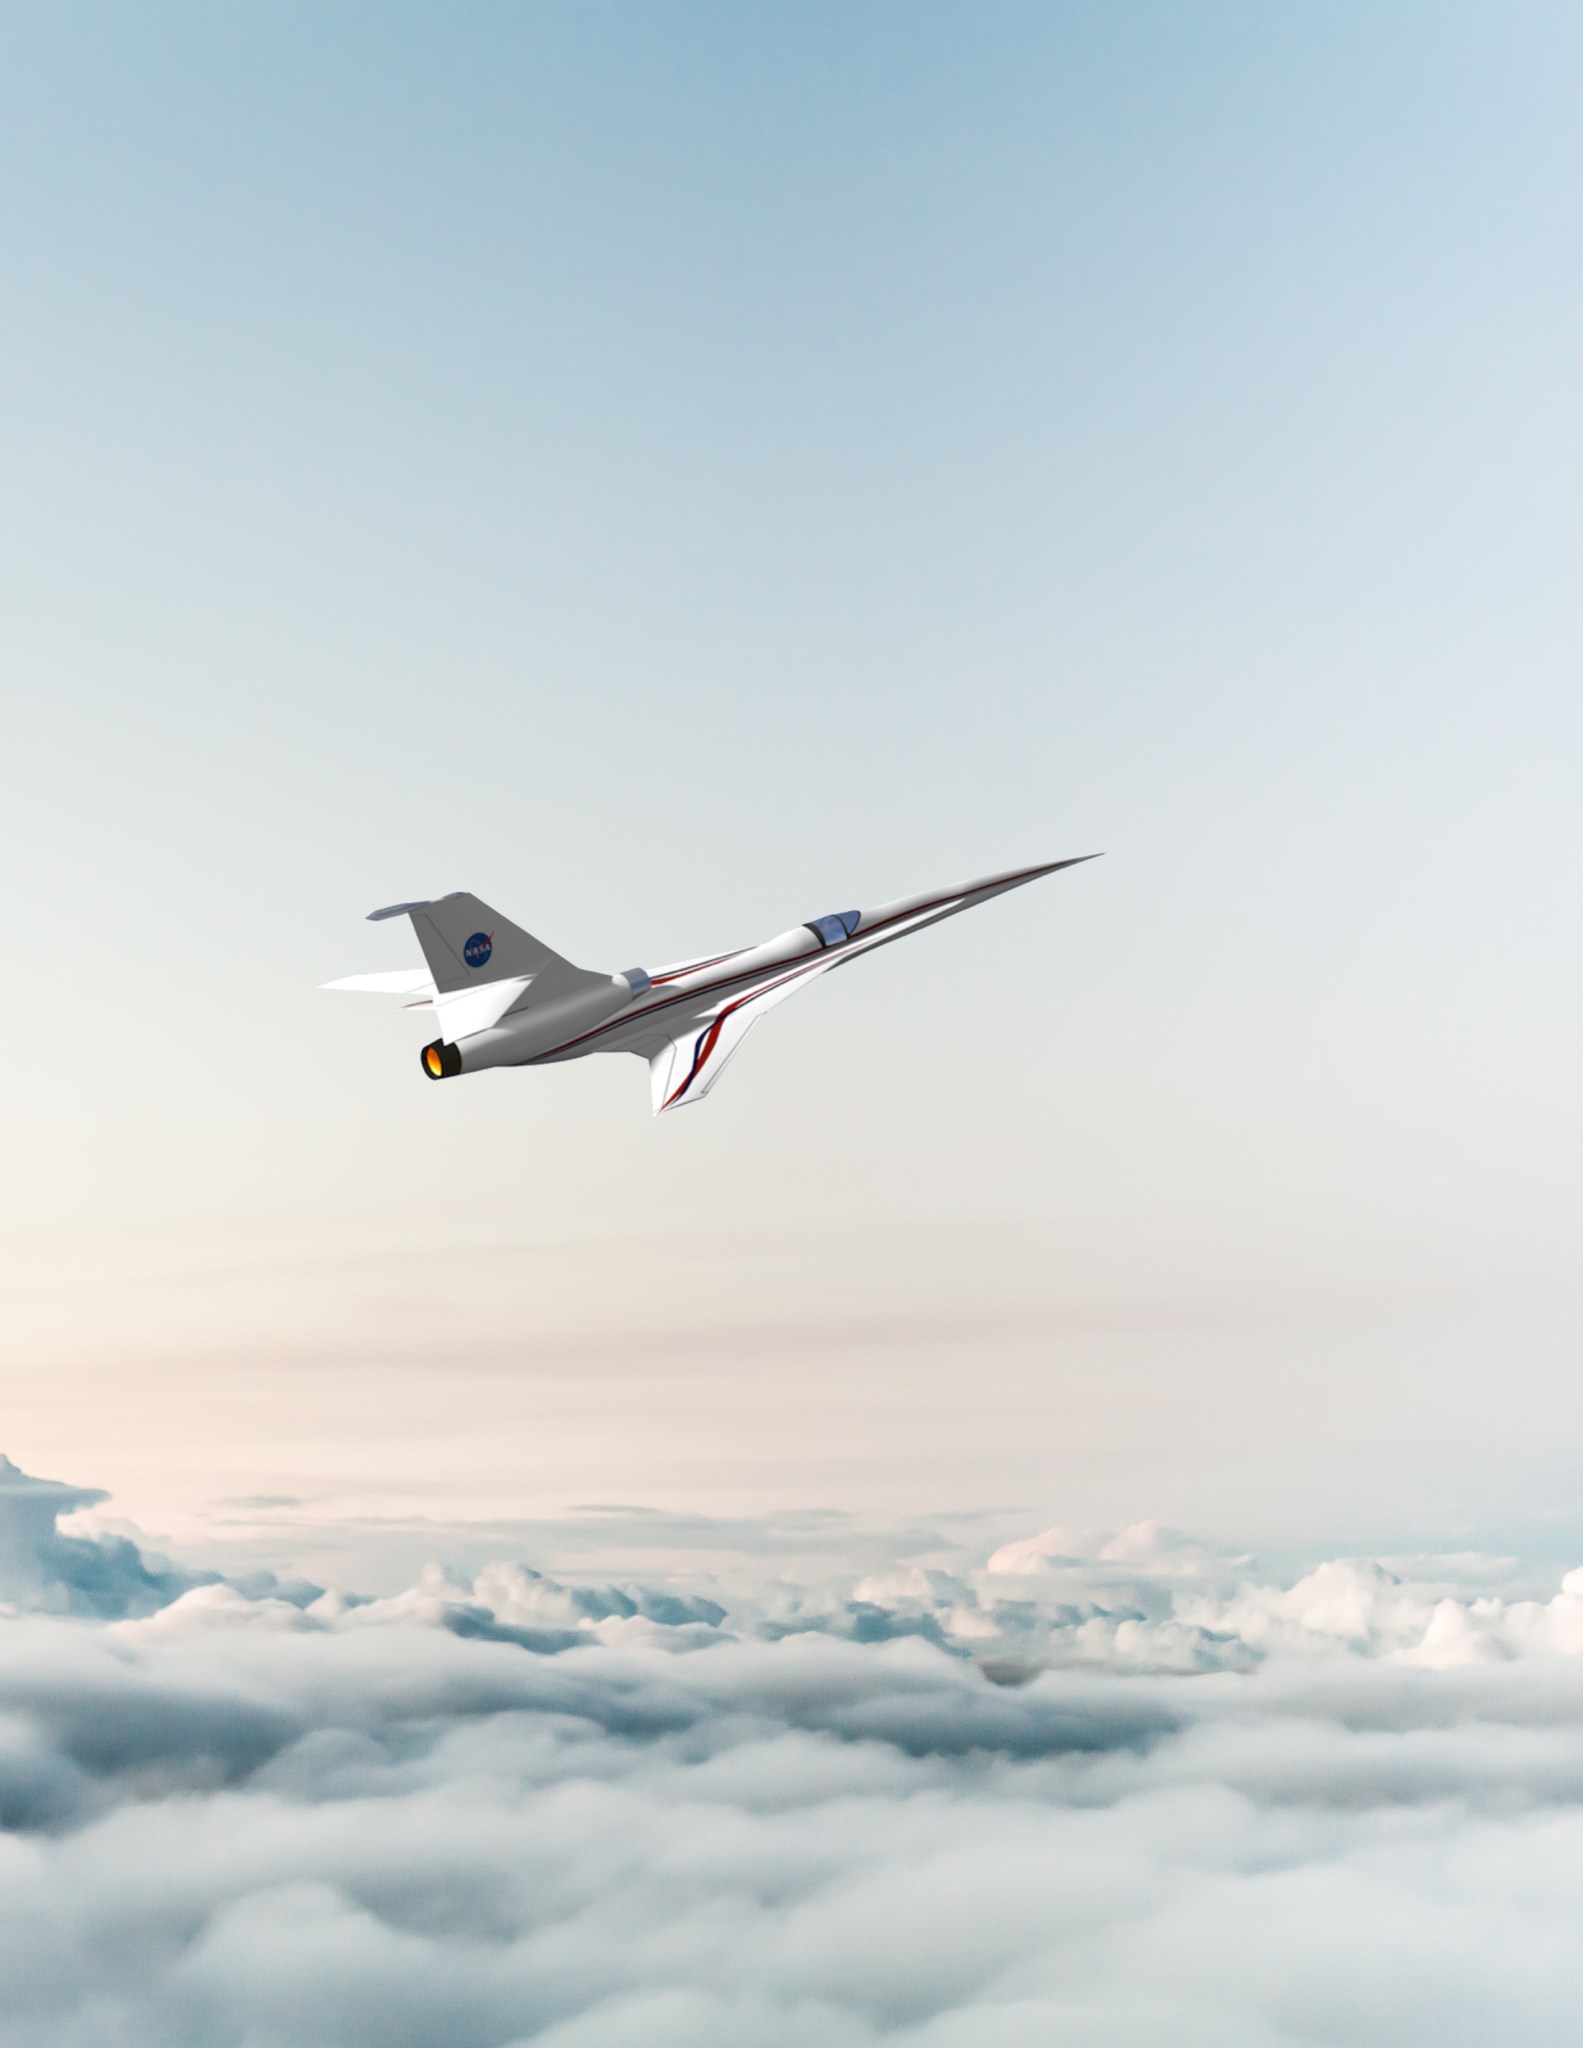 Artist concept of what a Low Sonic Boom Demonstrator vehicle may look like while flying above the clouds.